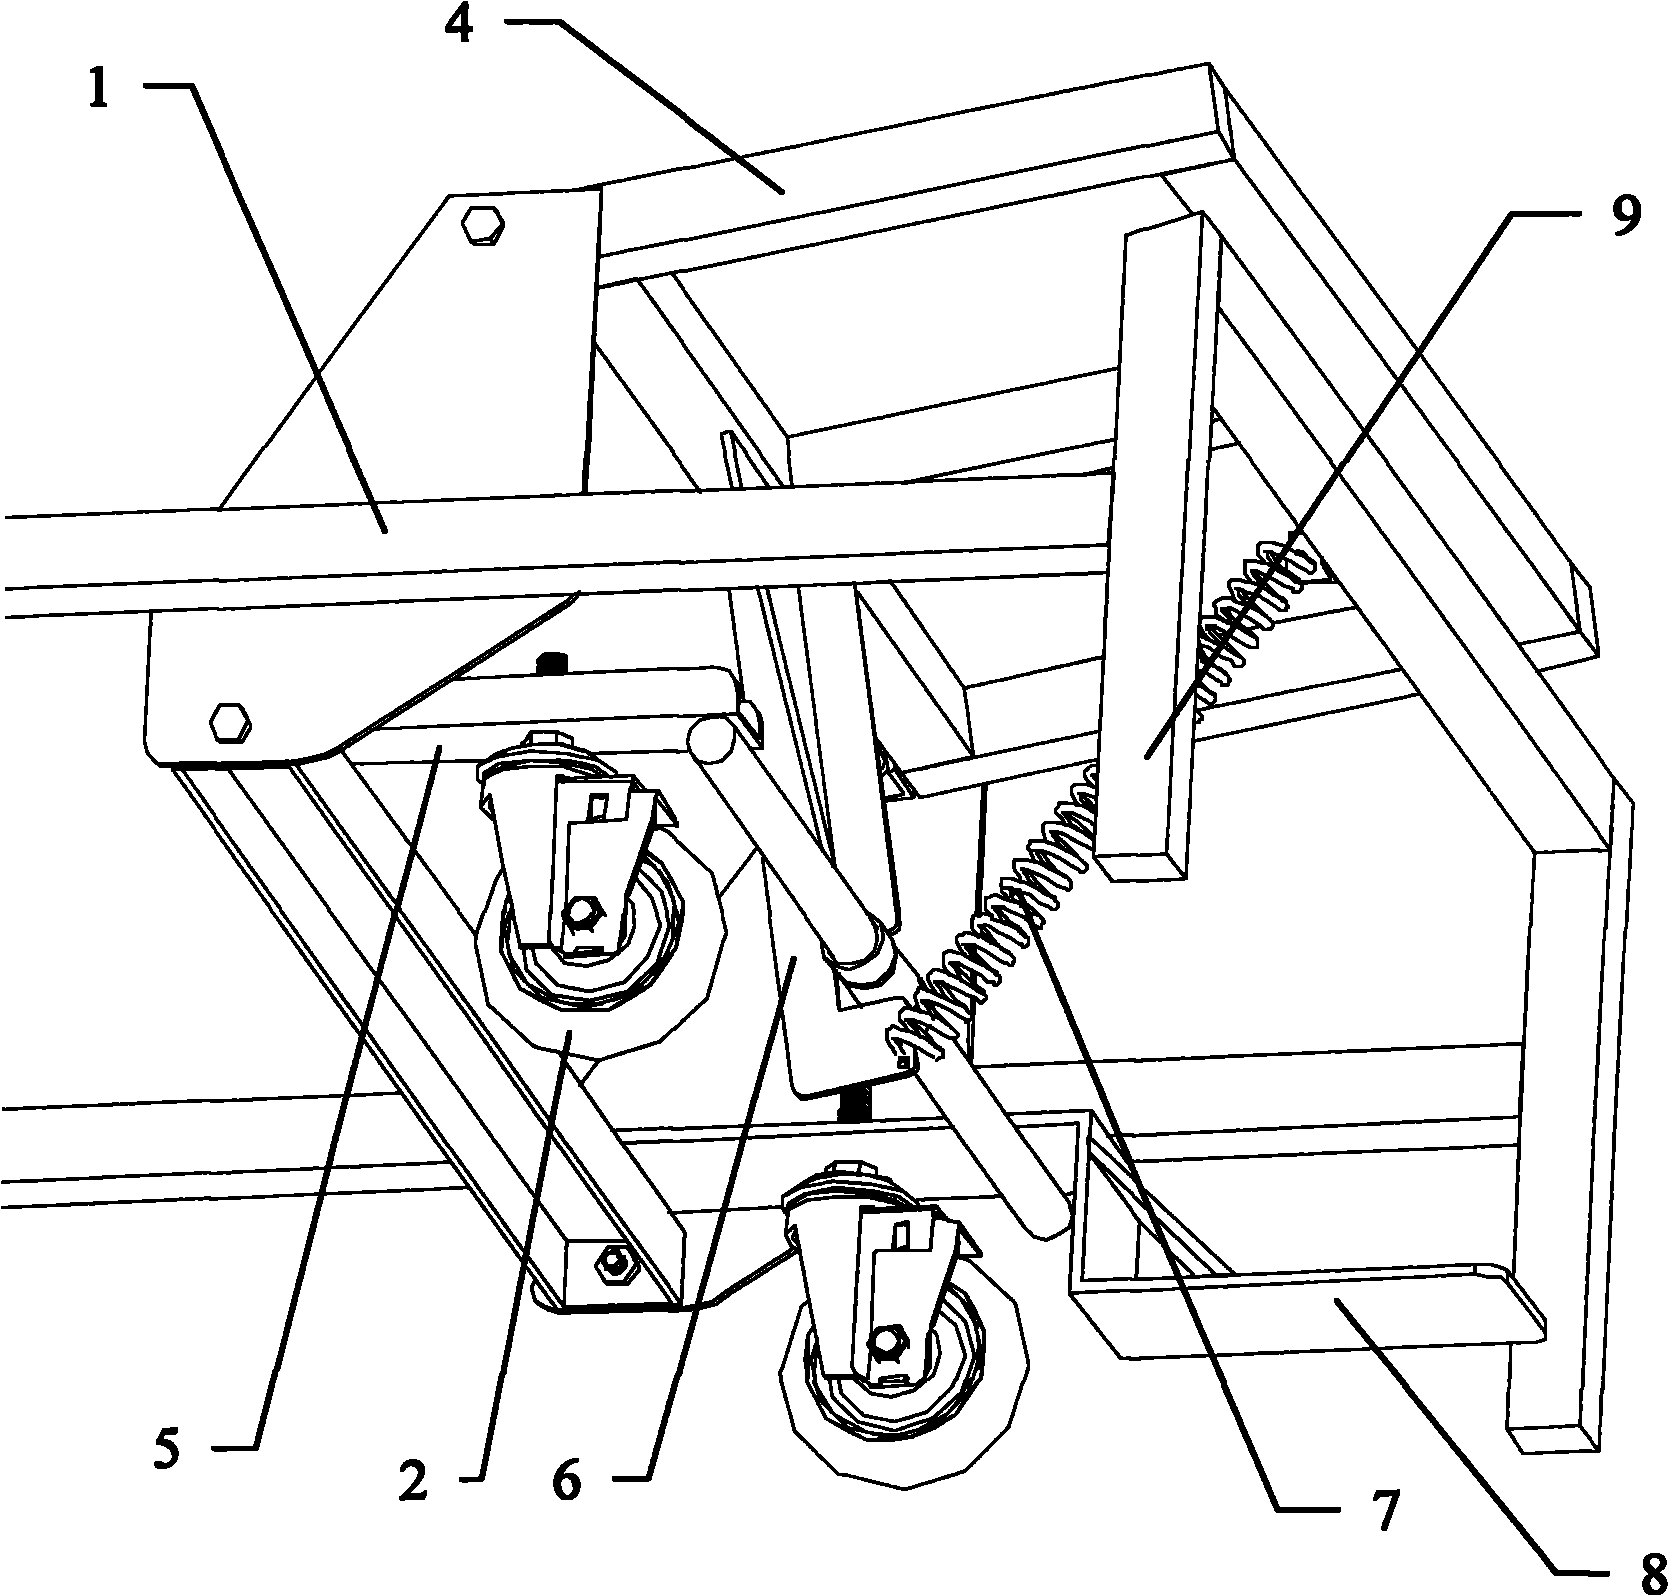 Positioning device for moveable step ladder